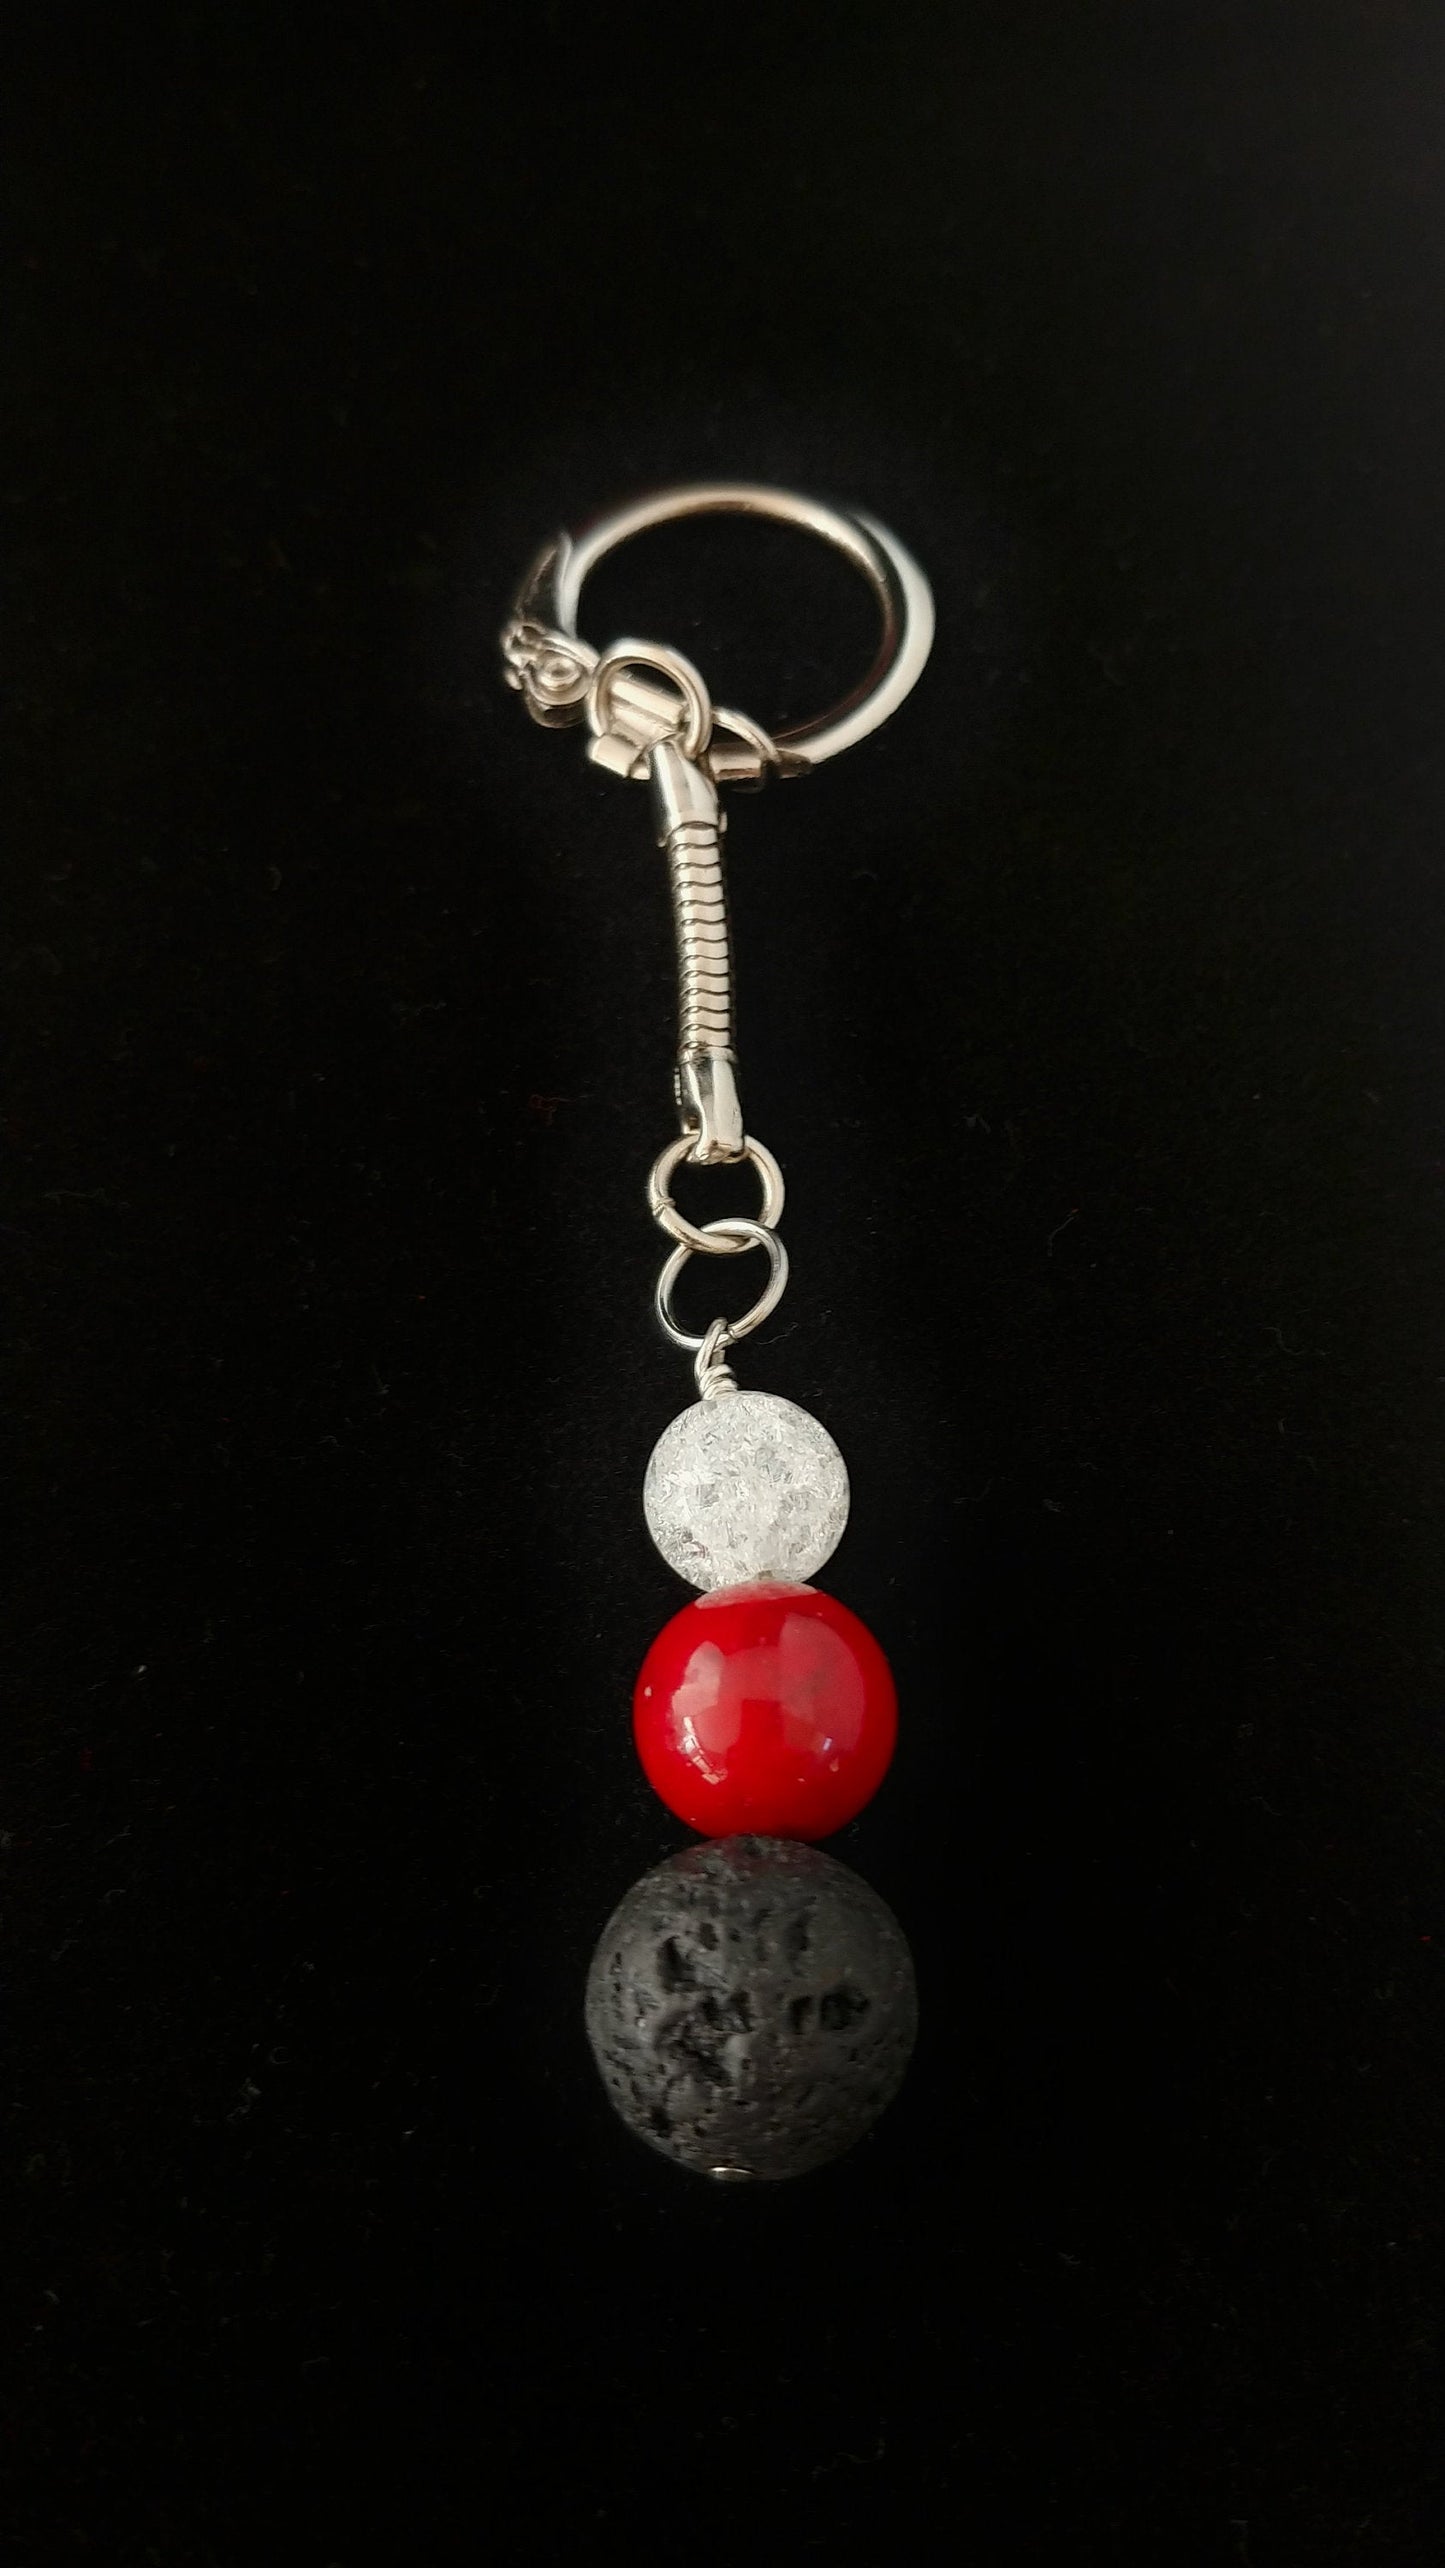 Ice and Fire Keychain